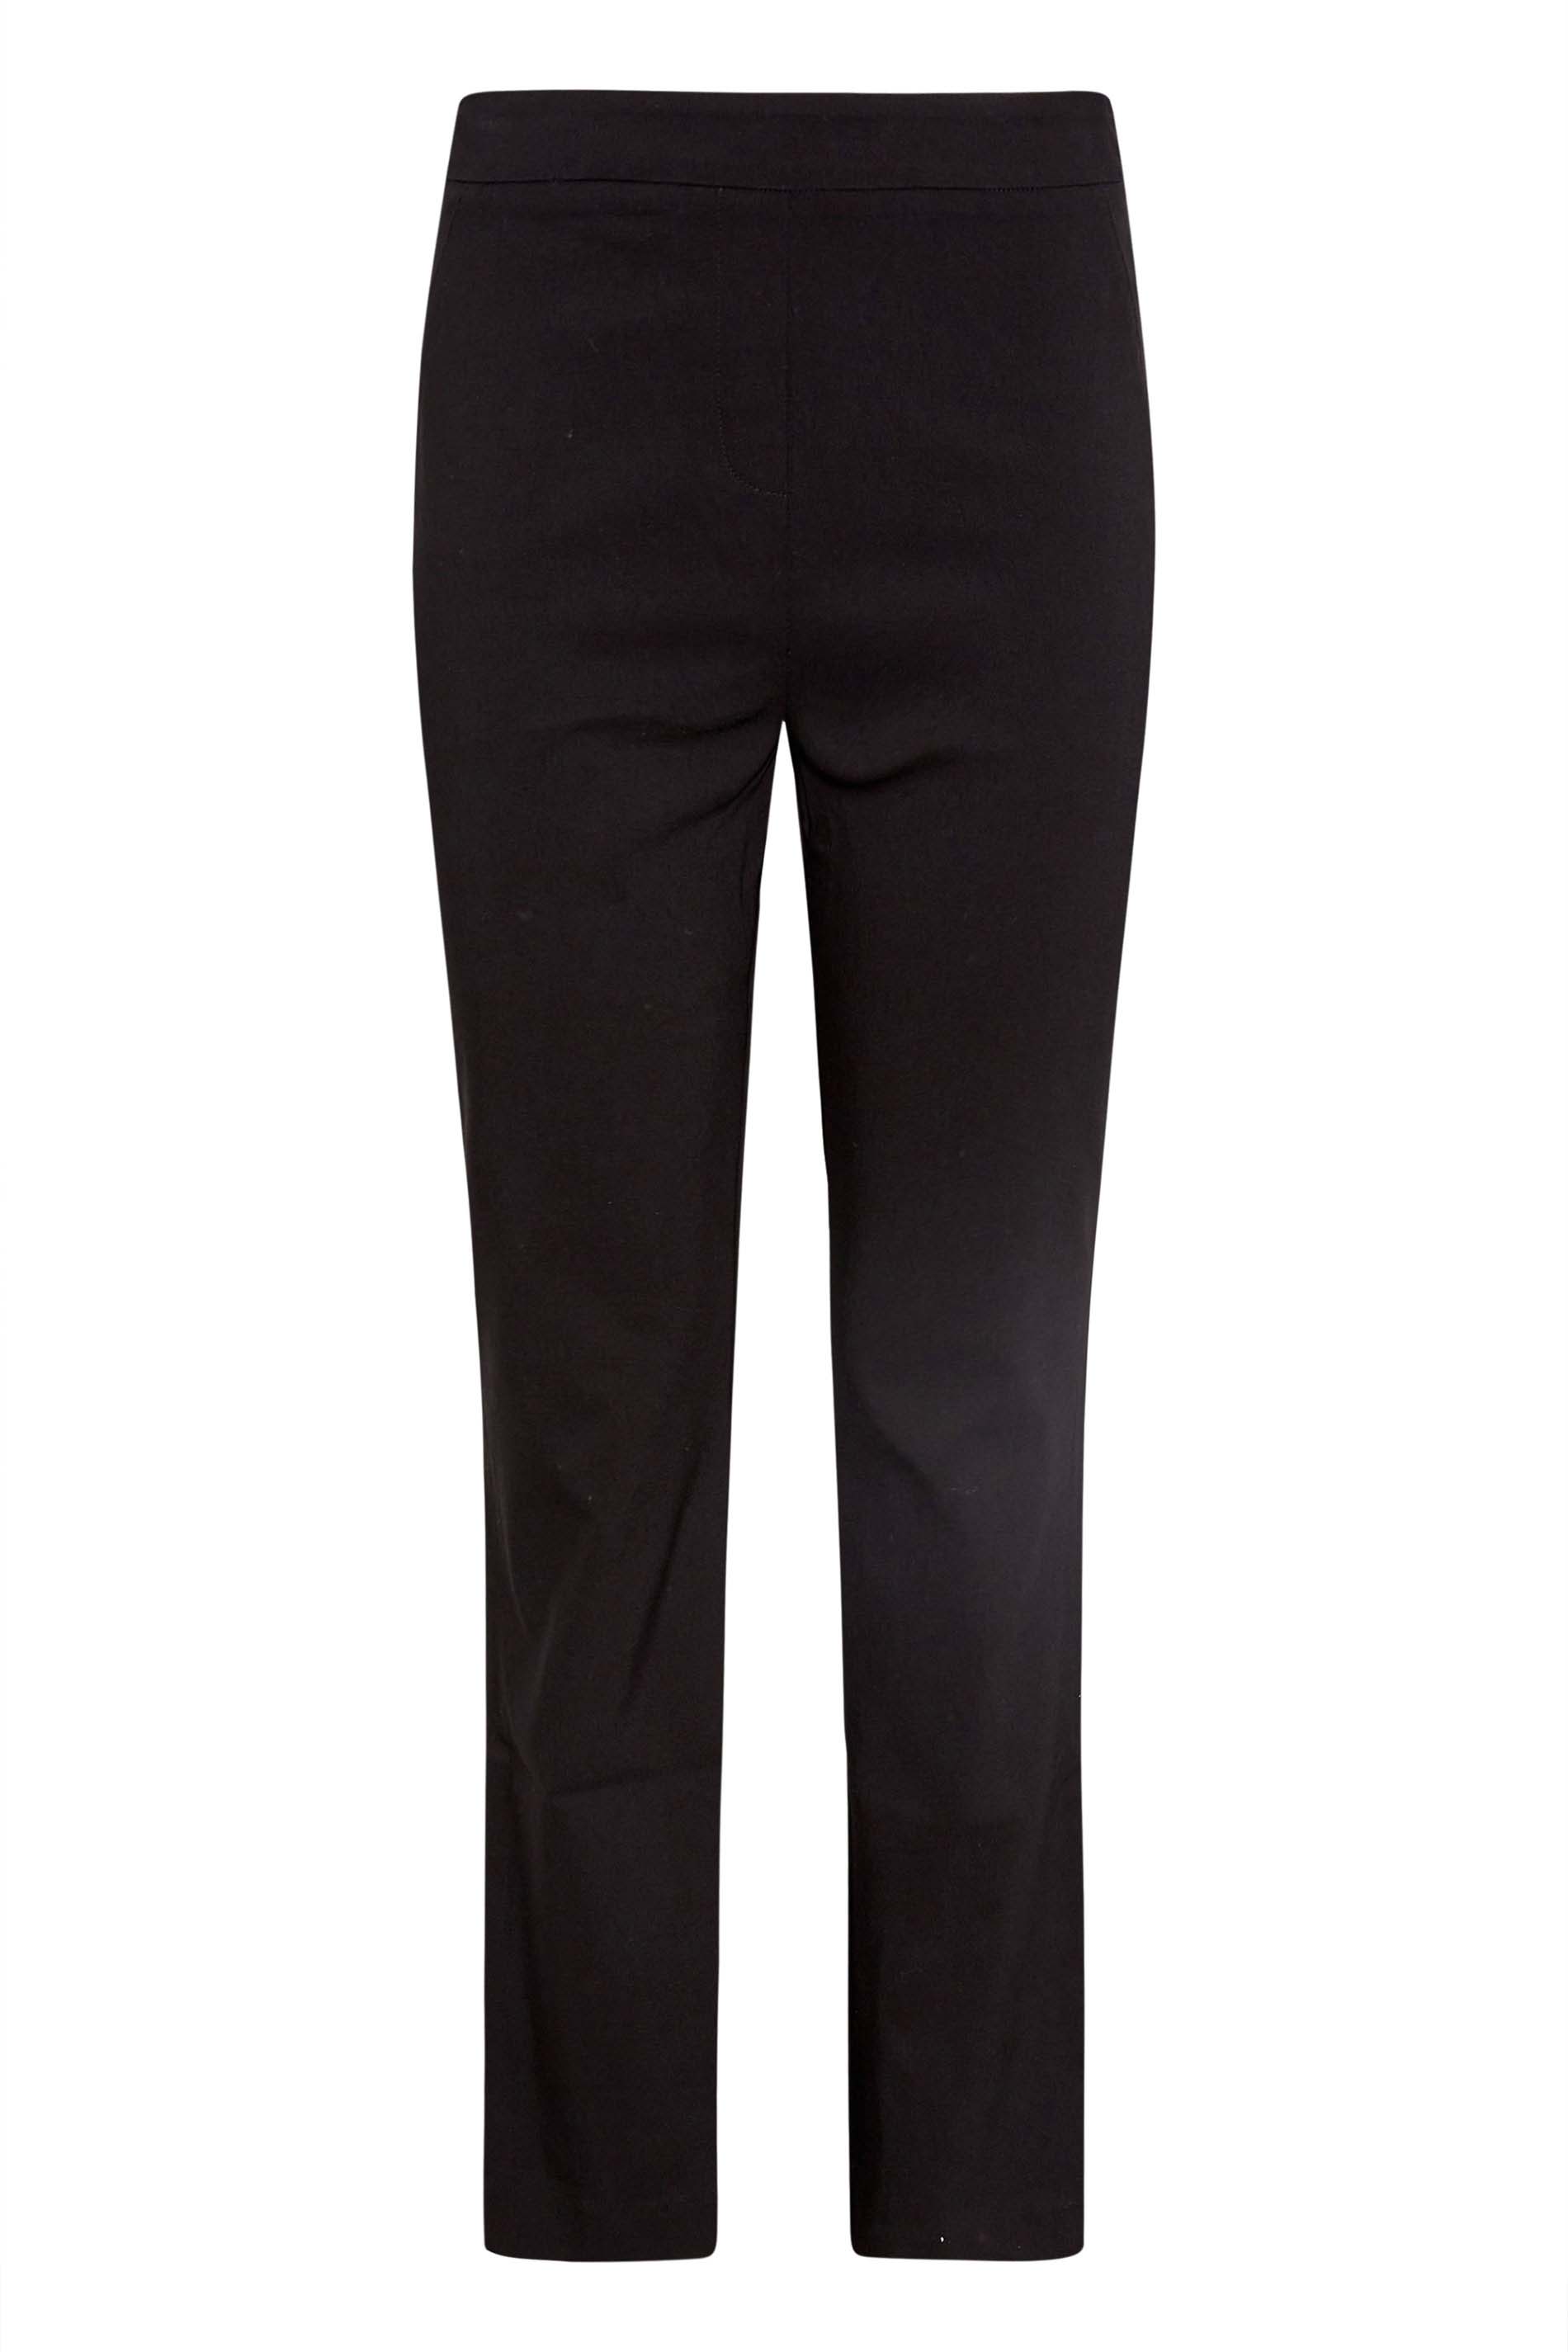 YOURS PETITE Plus Size Black Stretch Bengaline Bootcut Trousers | Yours Clothing 1